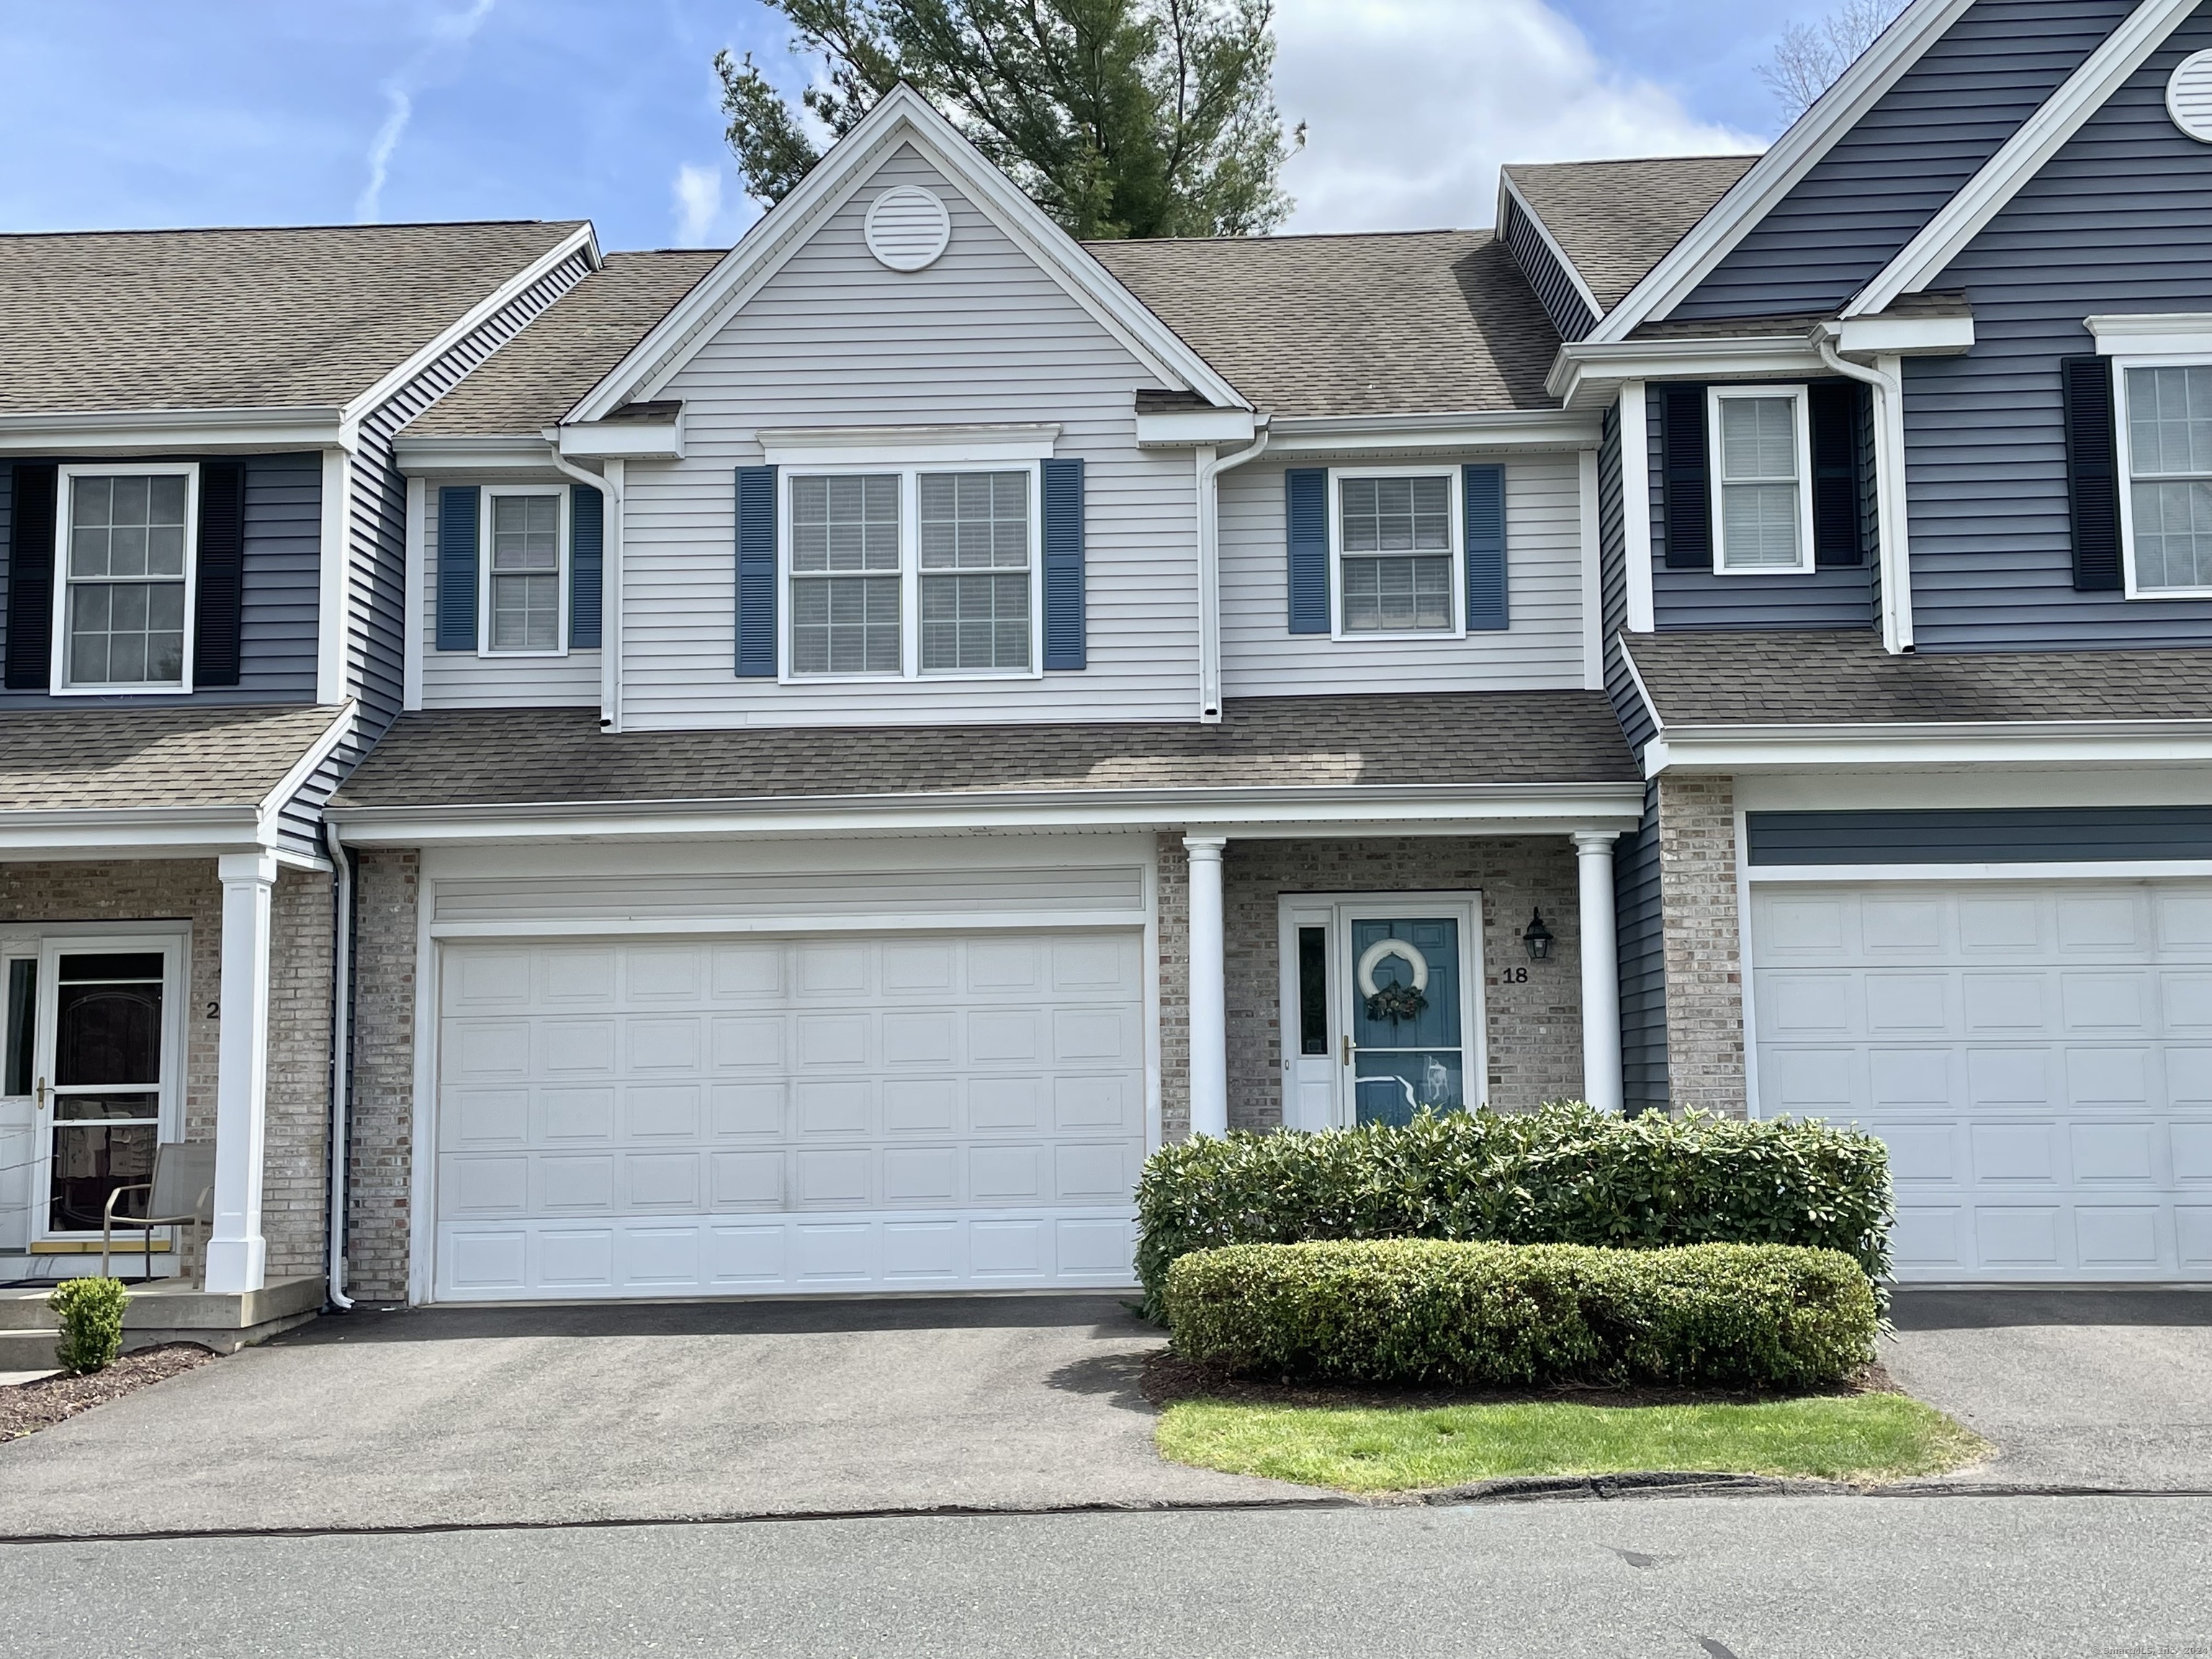 View Vernon, CT 06066 townhome